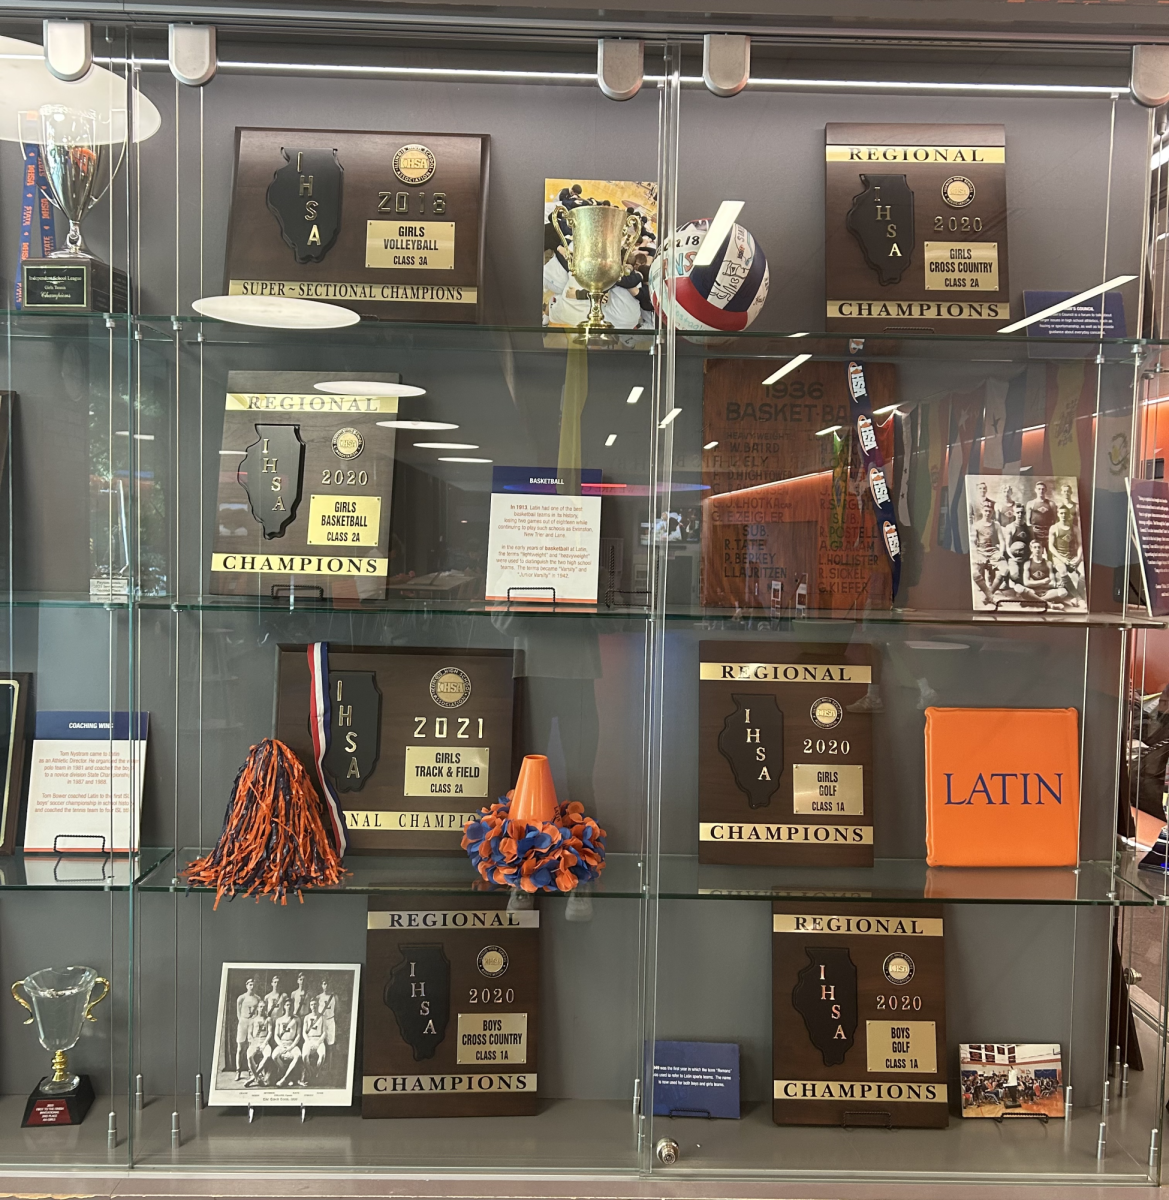 Latin Schools sports trophy case highlights the various achievements by sports teams. 